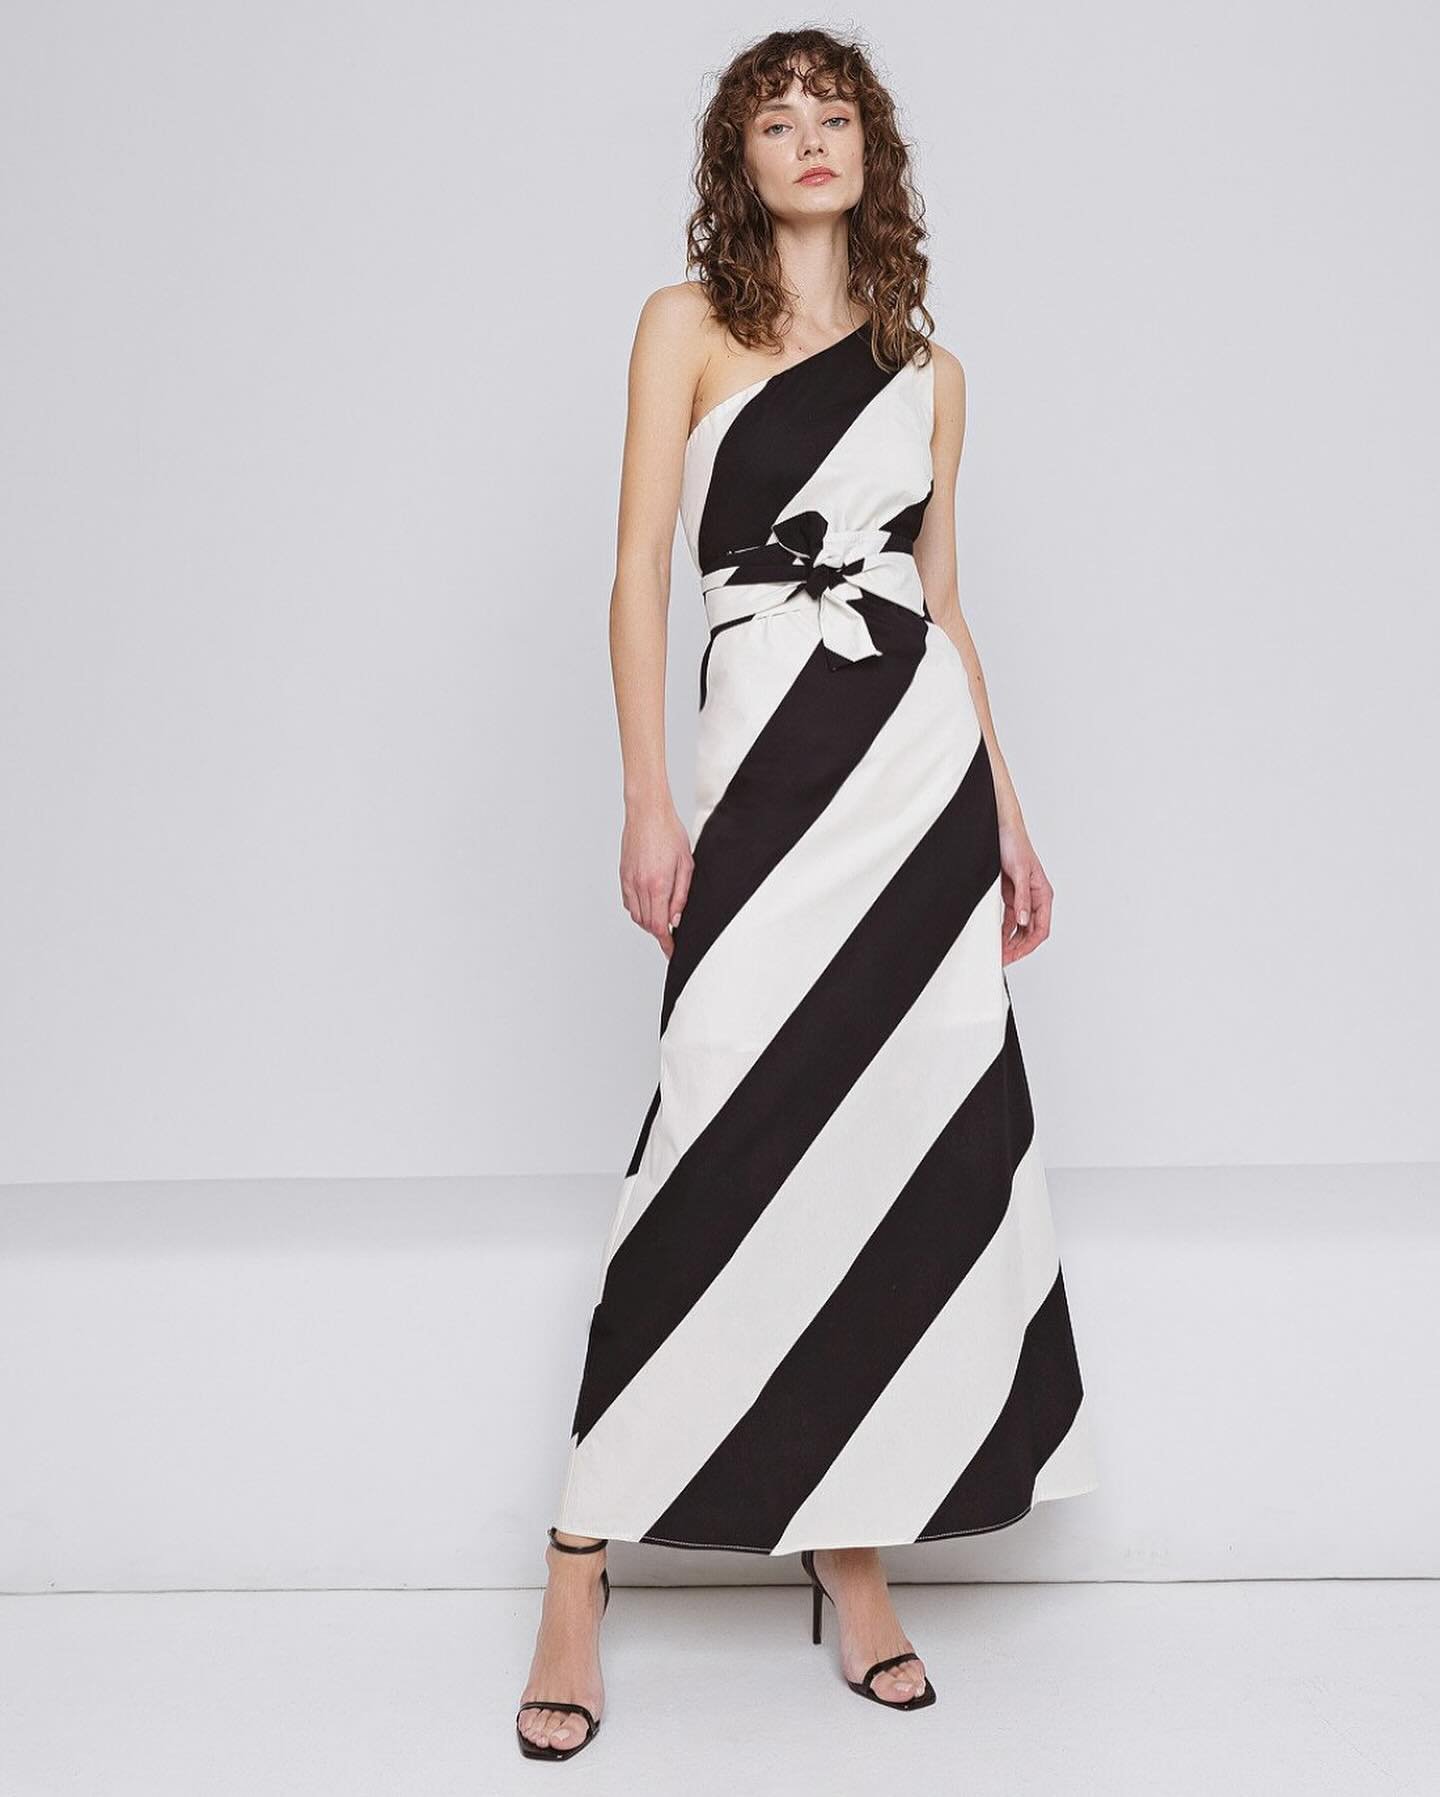 🖤🤍 New&hellip;monochrome classic striped maxi dress in a one shoulder style. Summer wedding ready 😎☀️🥂
Shop online or pop in store to see all our new arrivals, Fiona x 
#newarrivals #summervibes #occassionwear